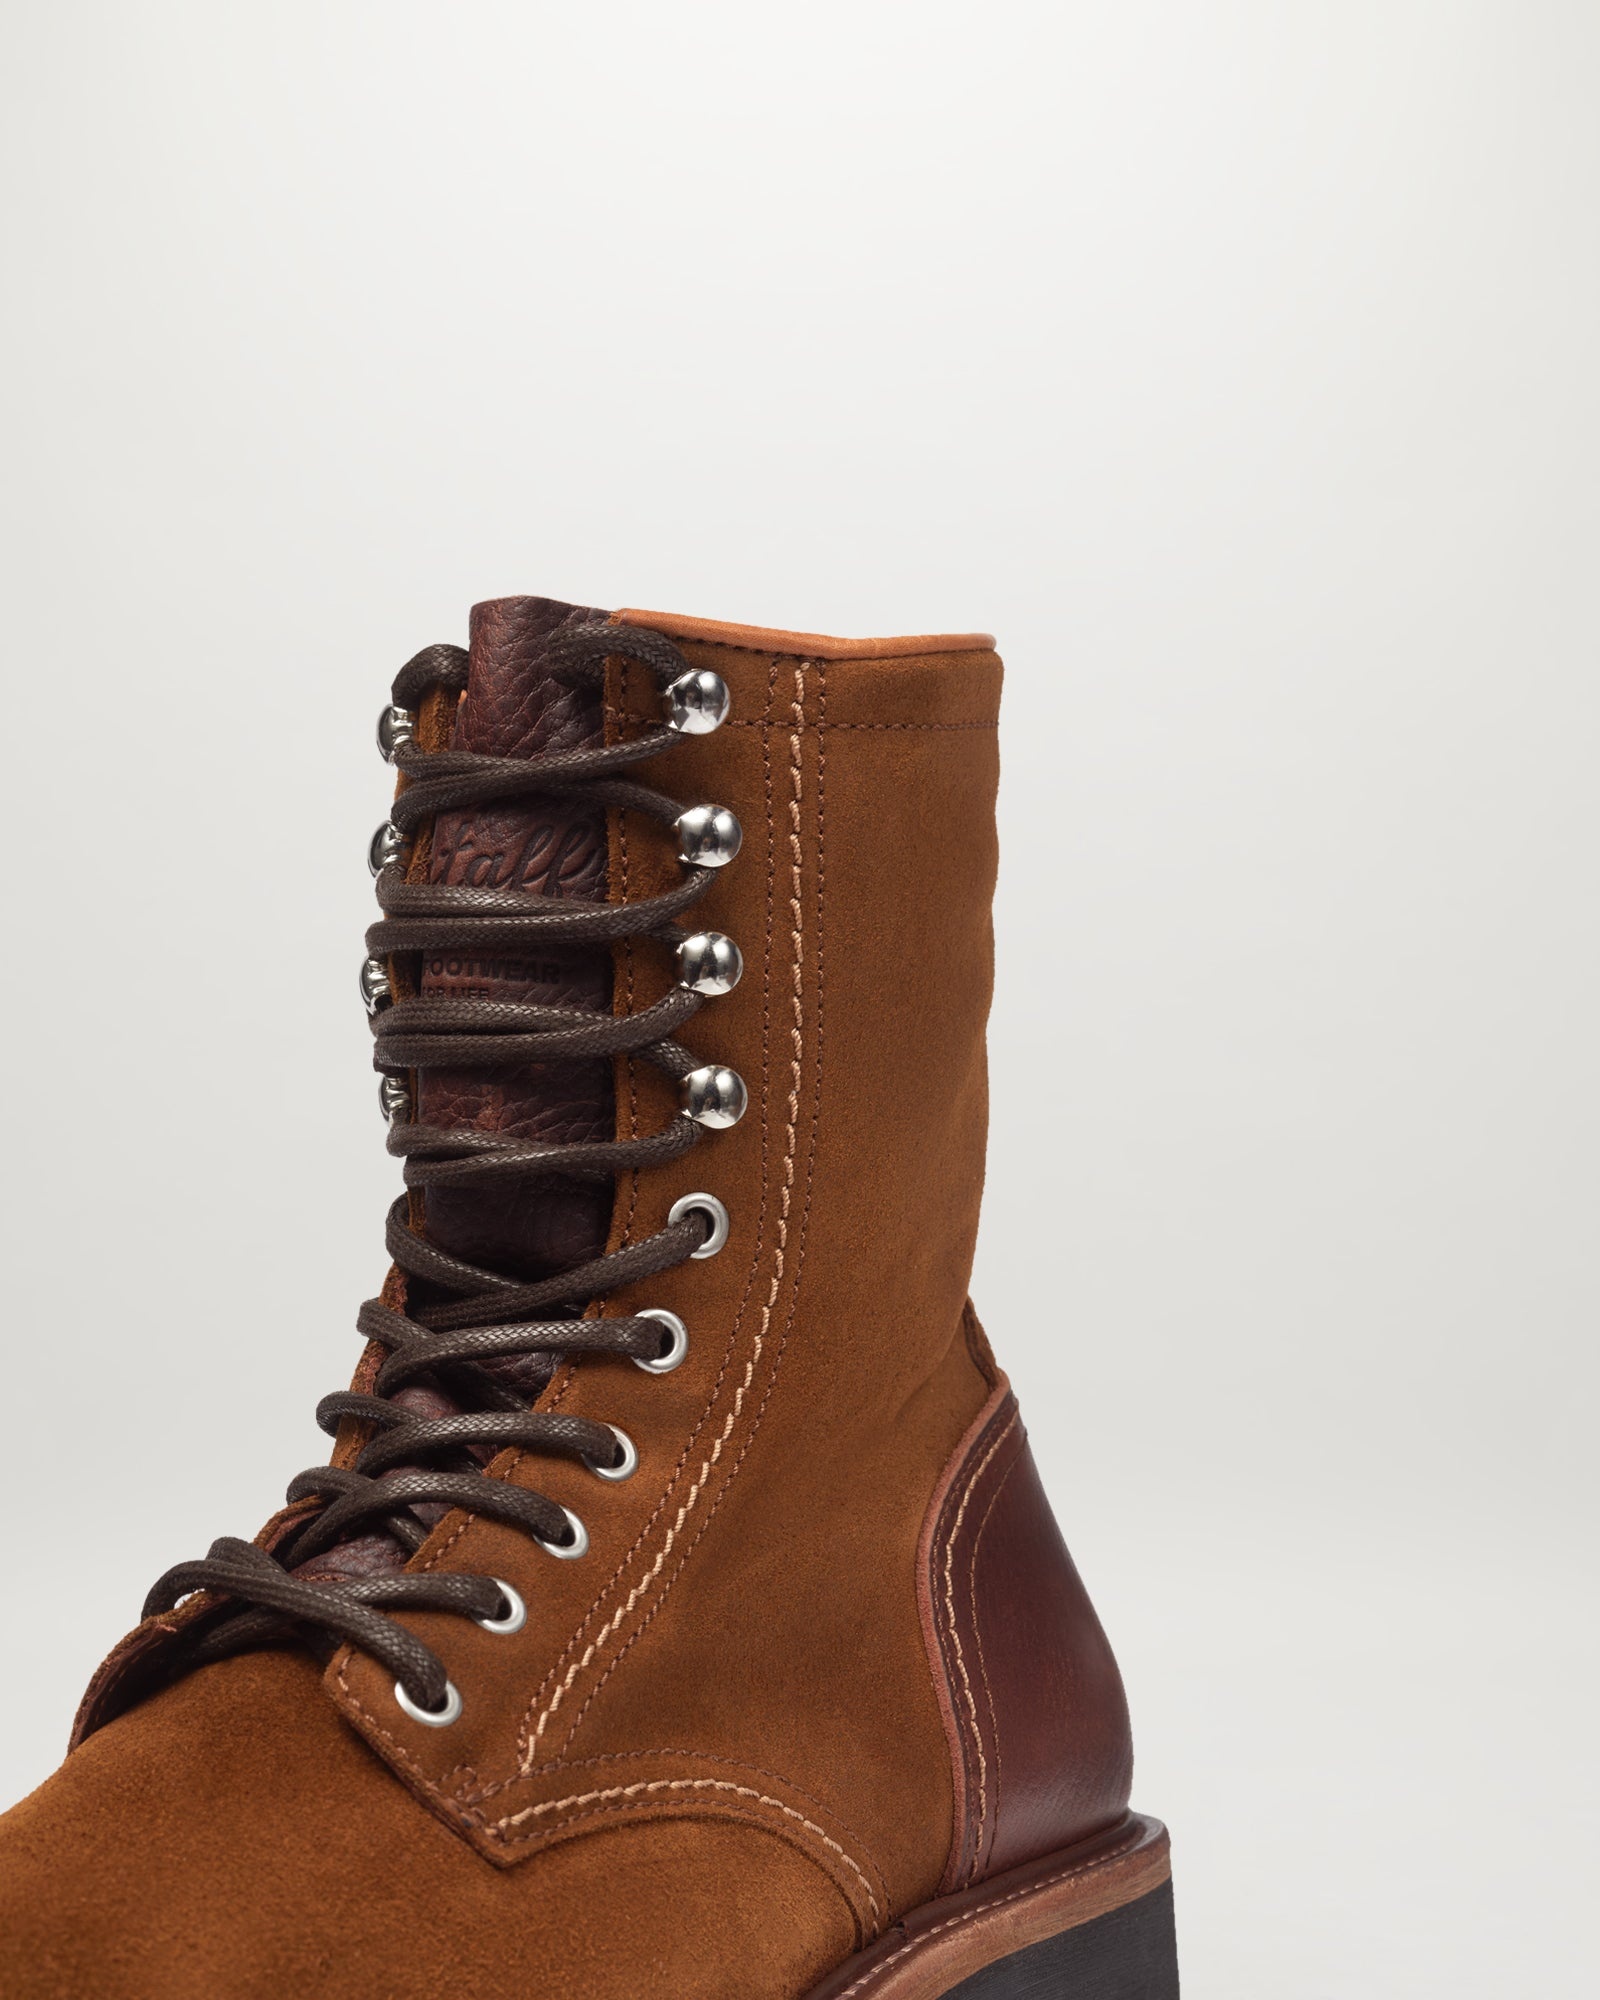 MARSHALL LACE UP BOOTS - 5